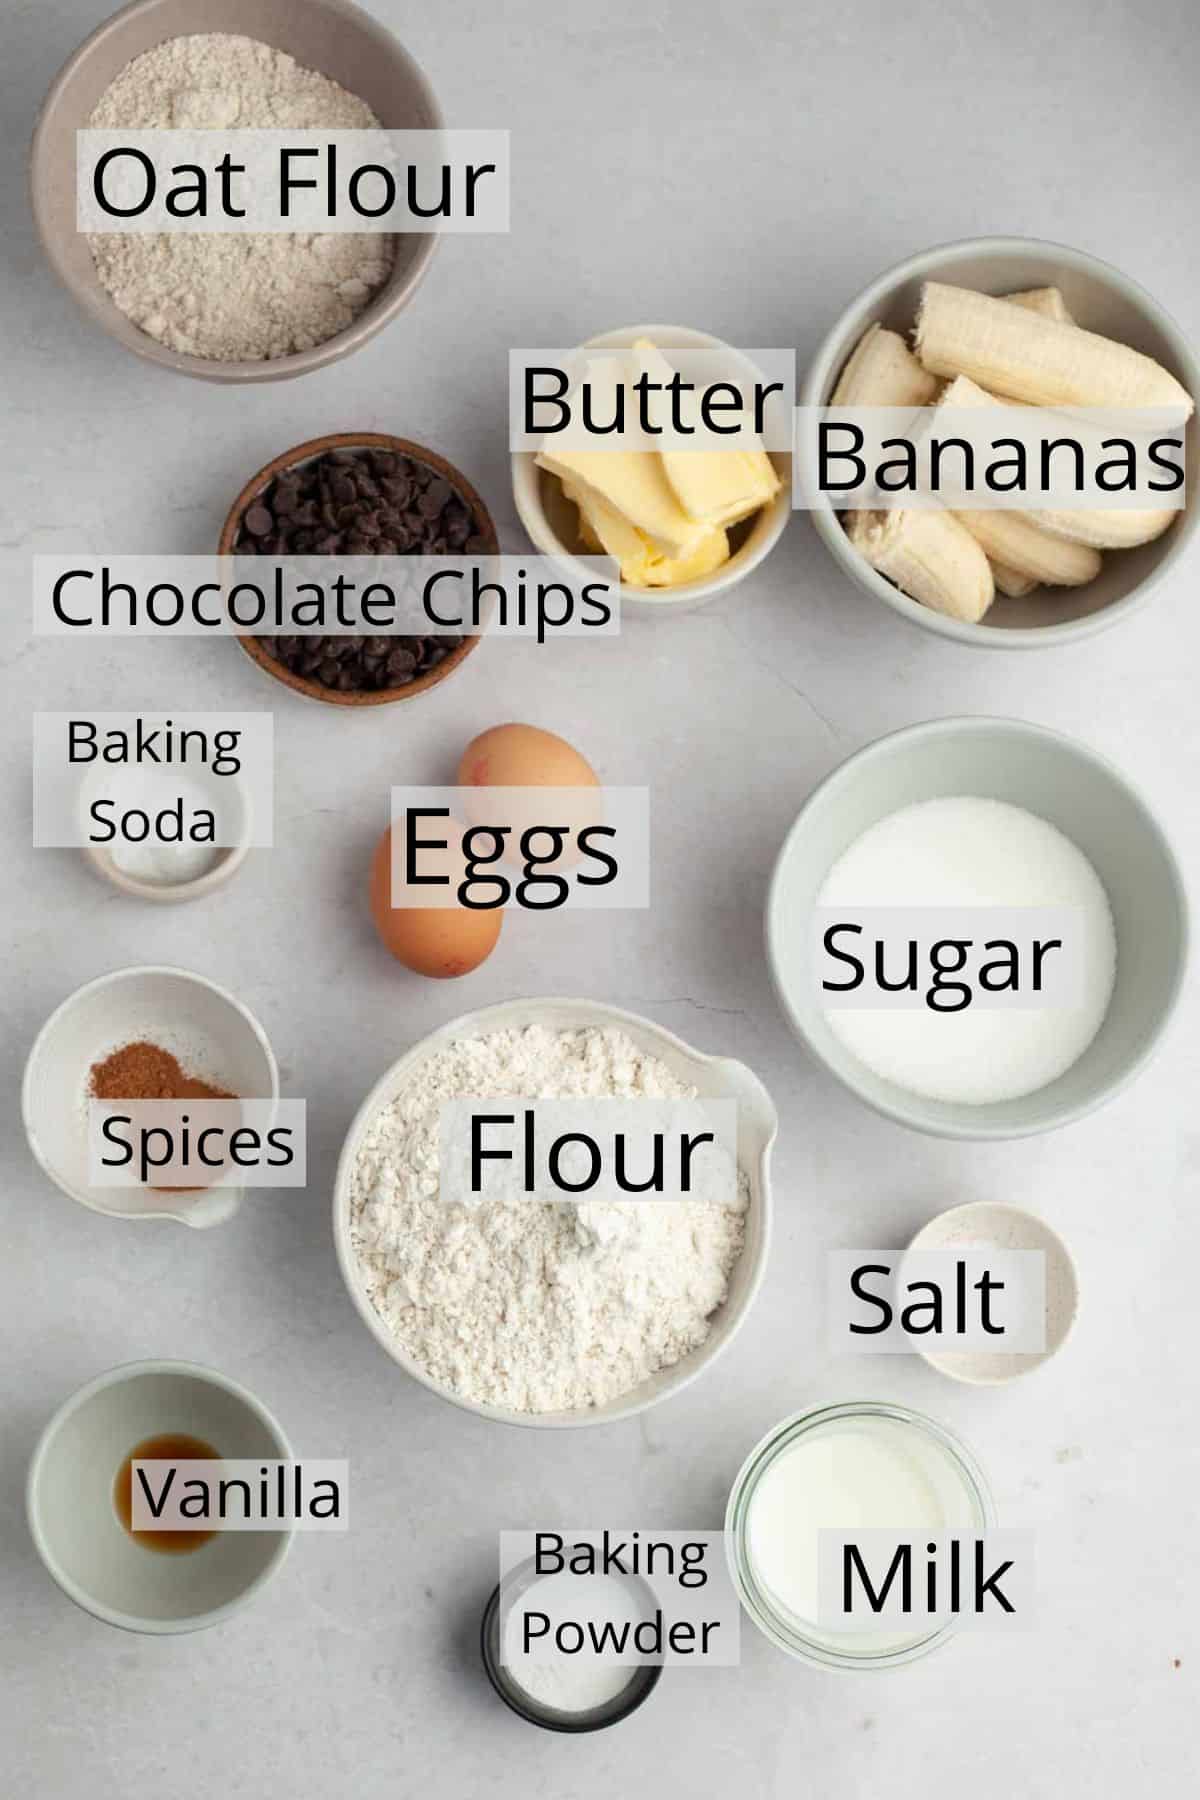 All the ingredients needed for oatmeal banana chocolate chip muffins.